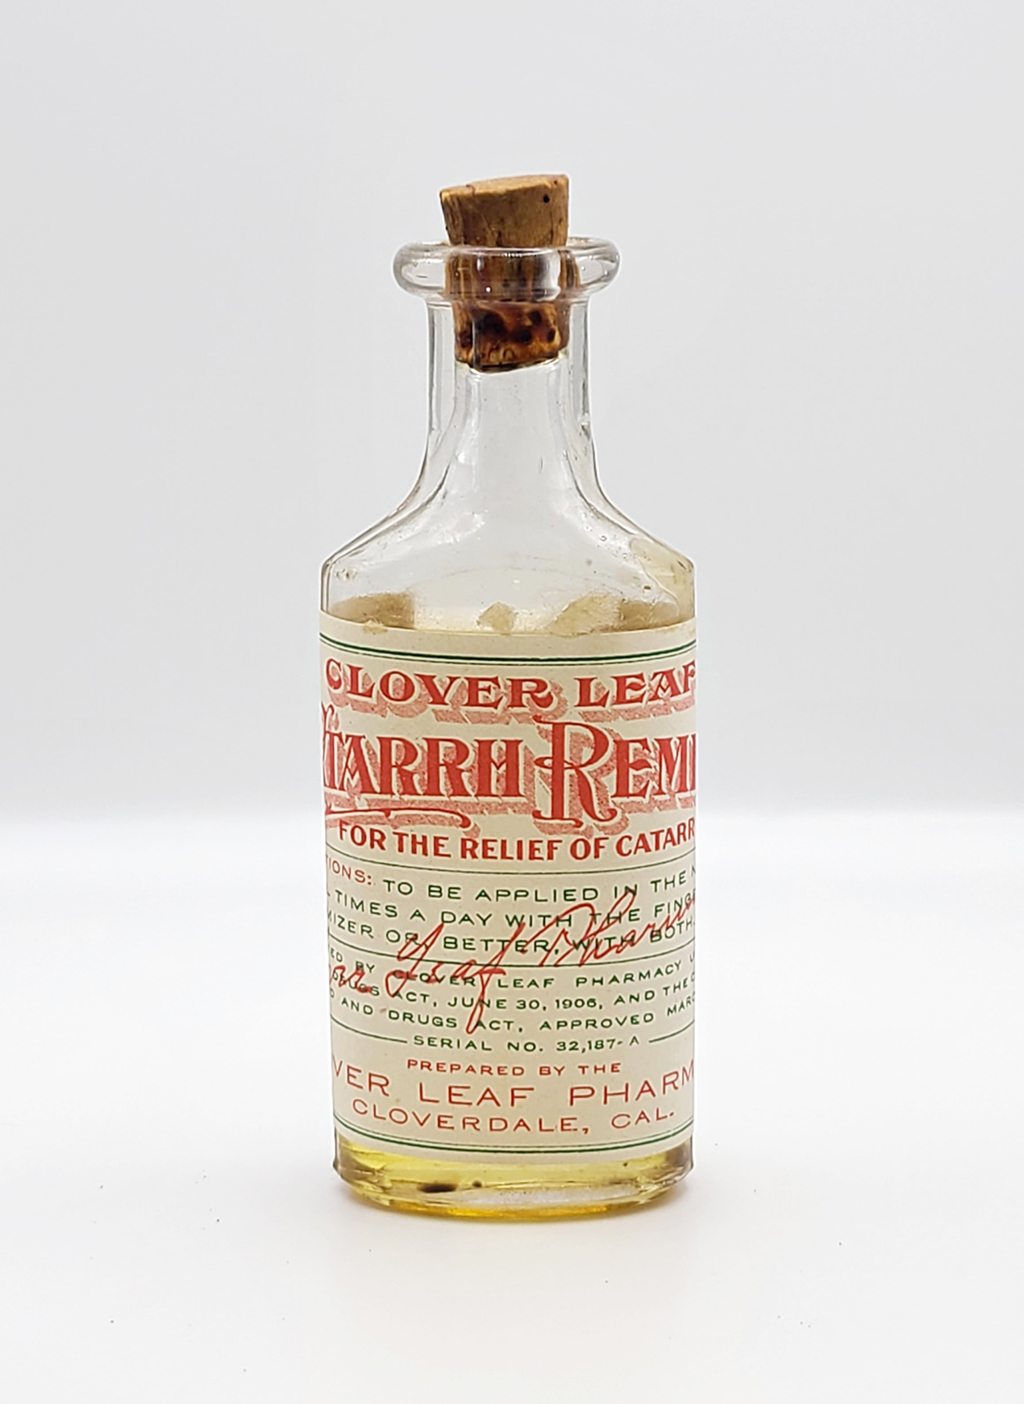 Clear bottle displays the label "Clover leaf catarrh remedy"